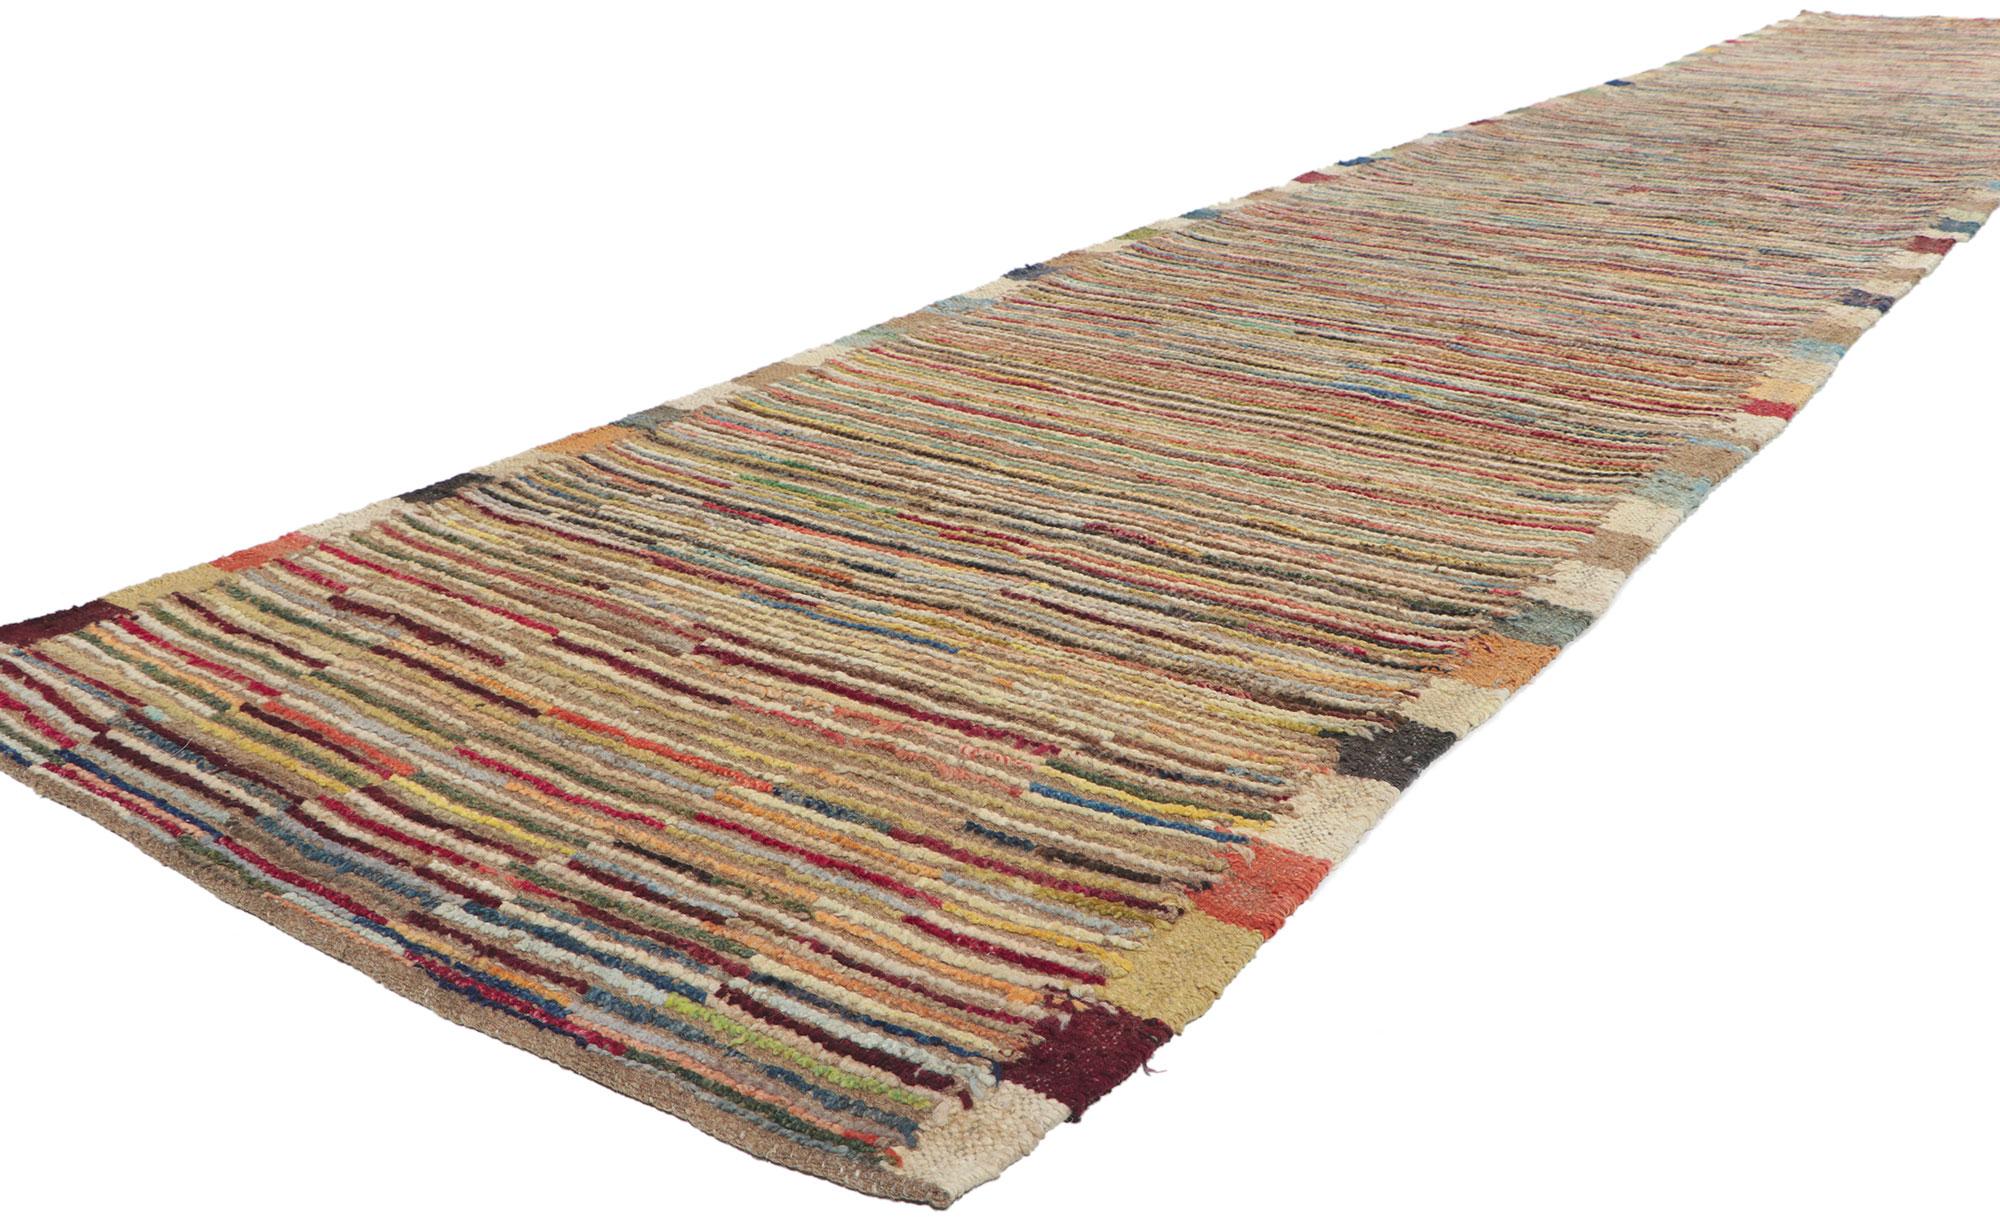 80772 Modern Earth-Tone Moroccan Rug Runner with Short Pile, 03'05 x 19'00. Immerse yourself in the allure of midcentury modern style with this hand-knotted wool Moroccan rug runner—a striking manifestation of woven beauty. Delight in the subtle